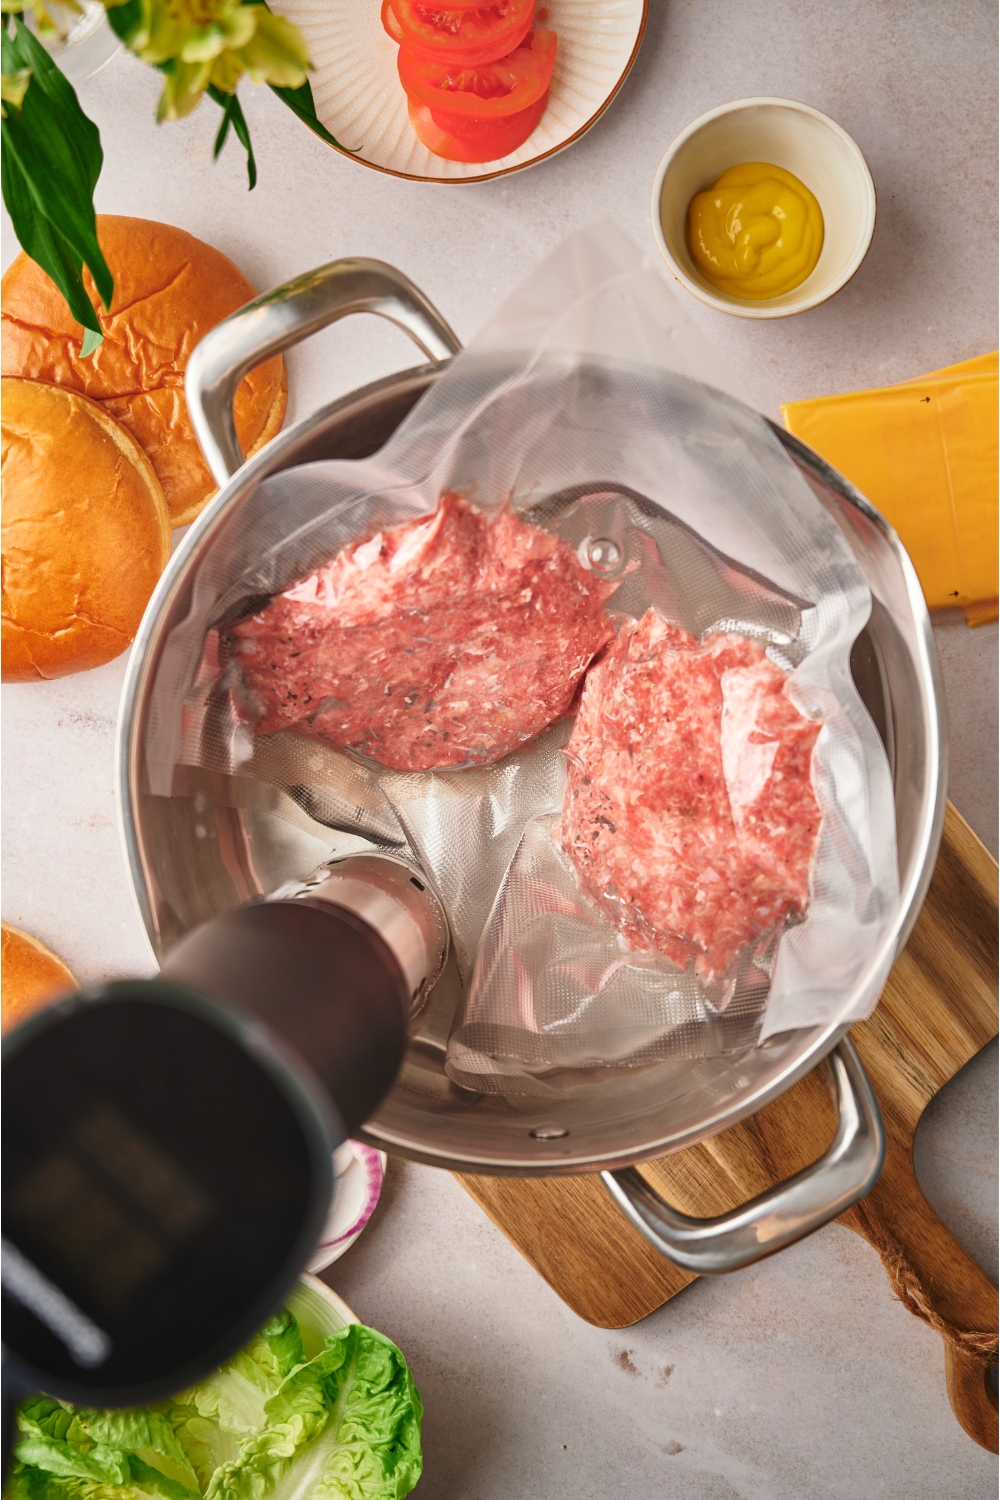 Two burger patties in a sous vide bag in a water bath with a sous vide machine in it. The water bath is surrounded by ingredients for making cheeseburgers.